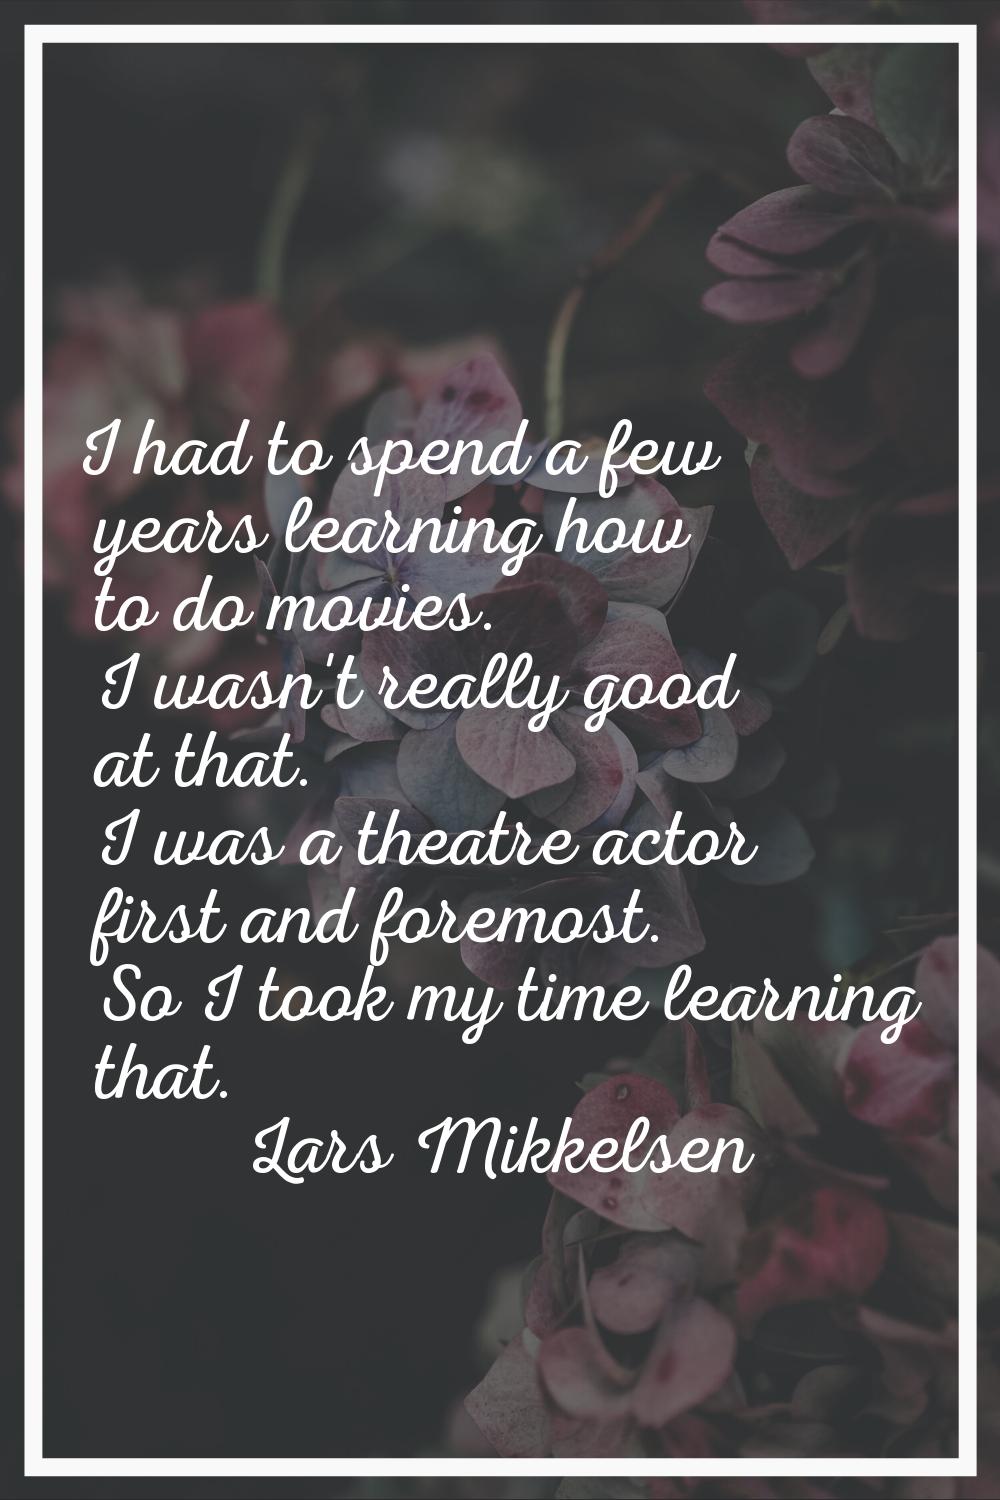 I had to spend a few years learning how to do movies. I wasn't really good at that. I was a theatre